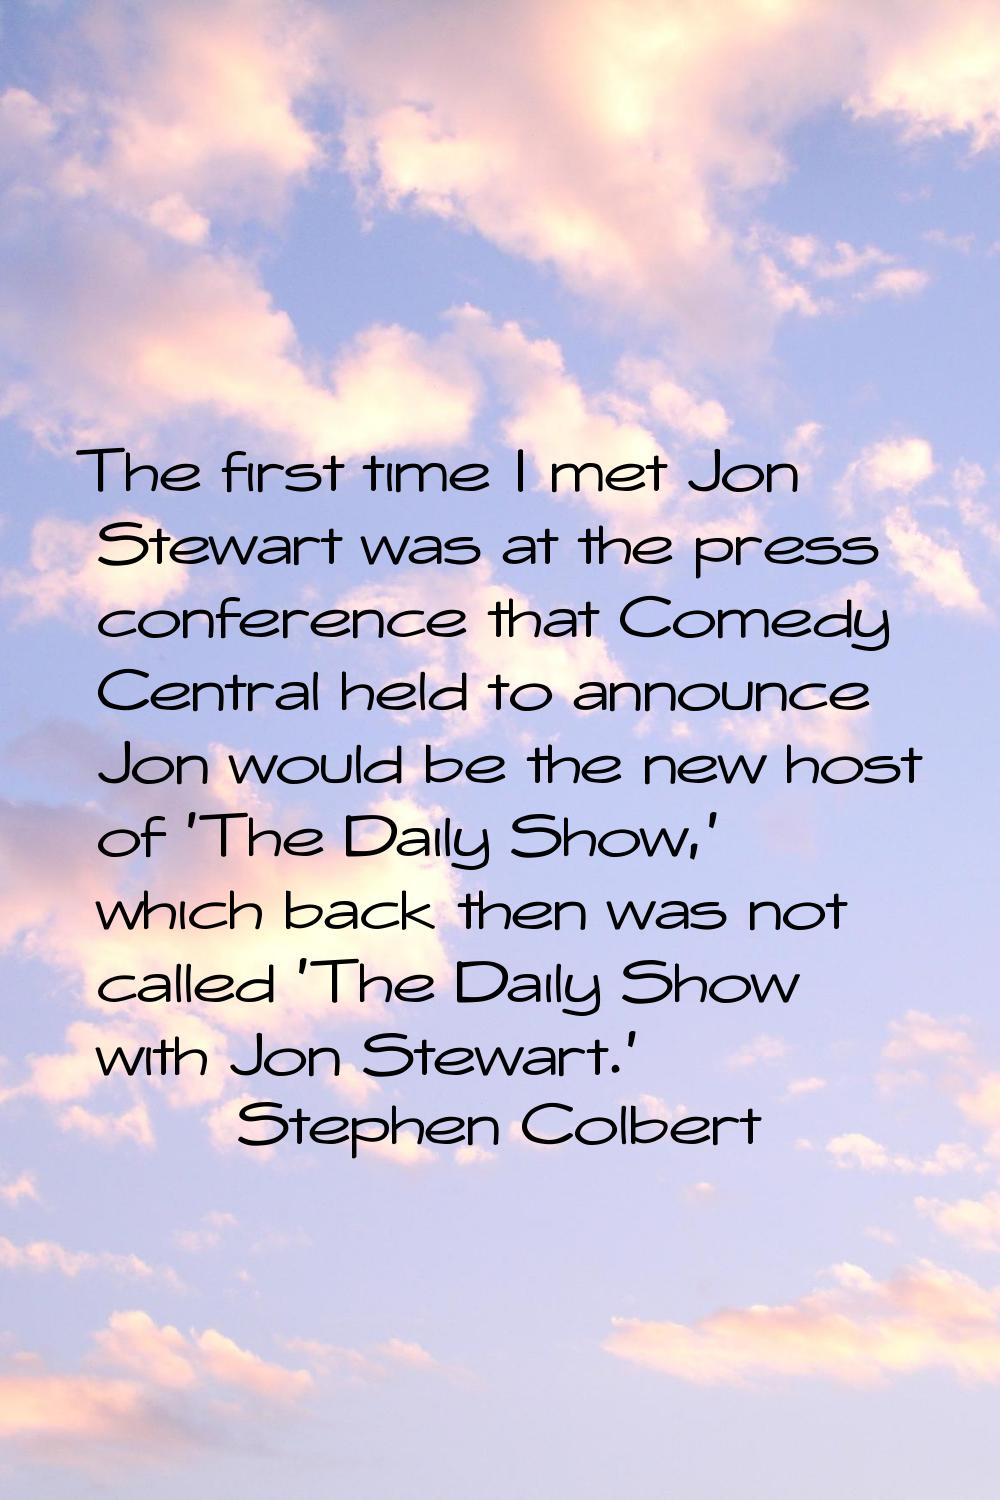 The first time I met Jon Stewart was at the press conference that Comedy Central held to announce J